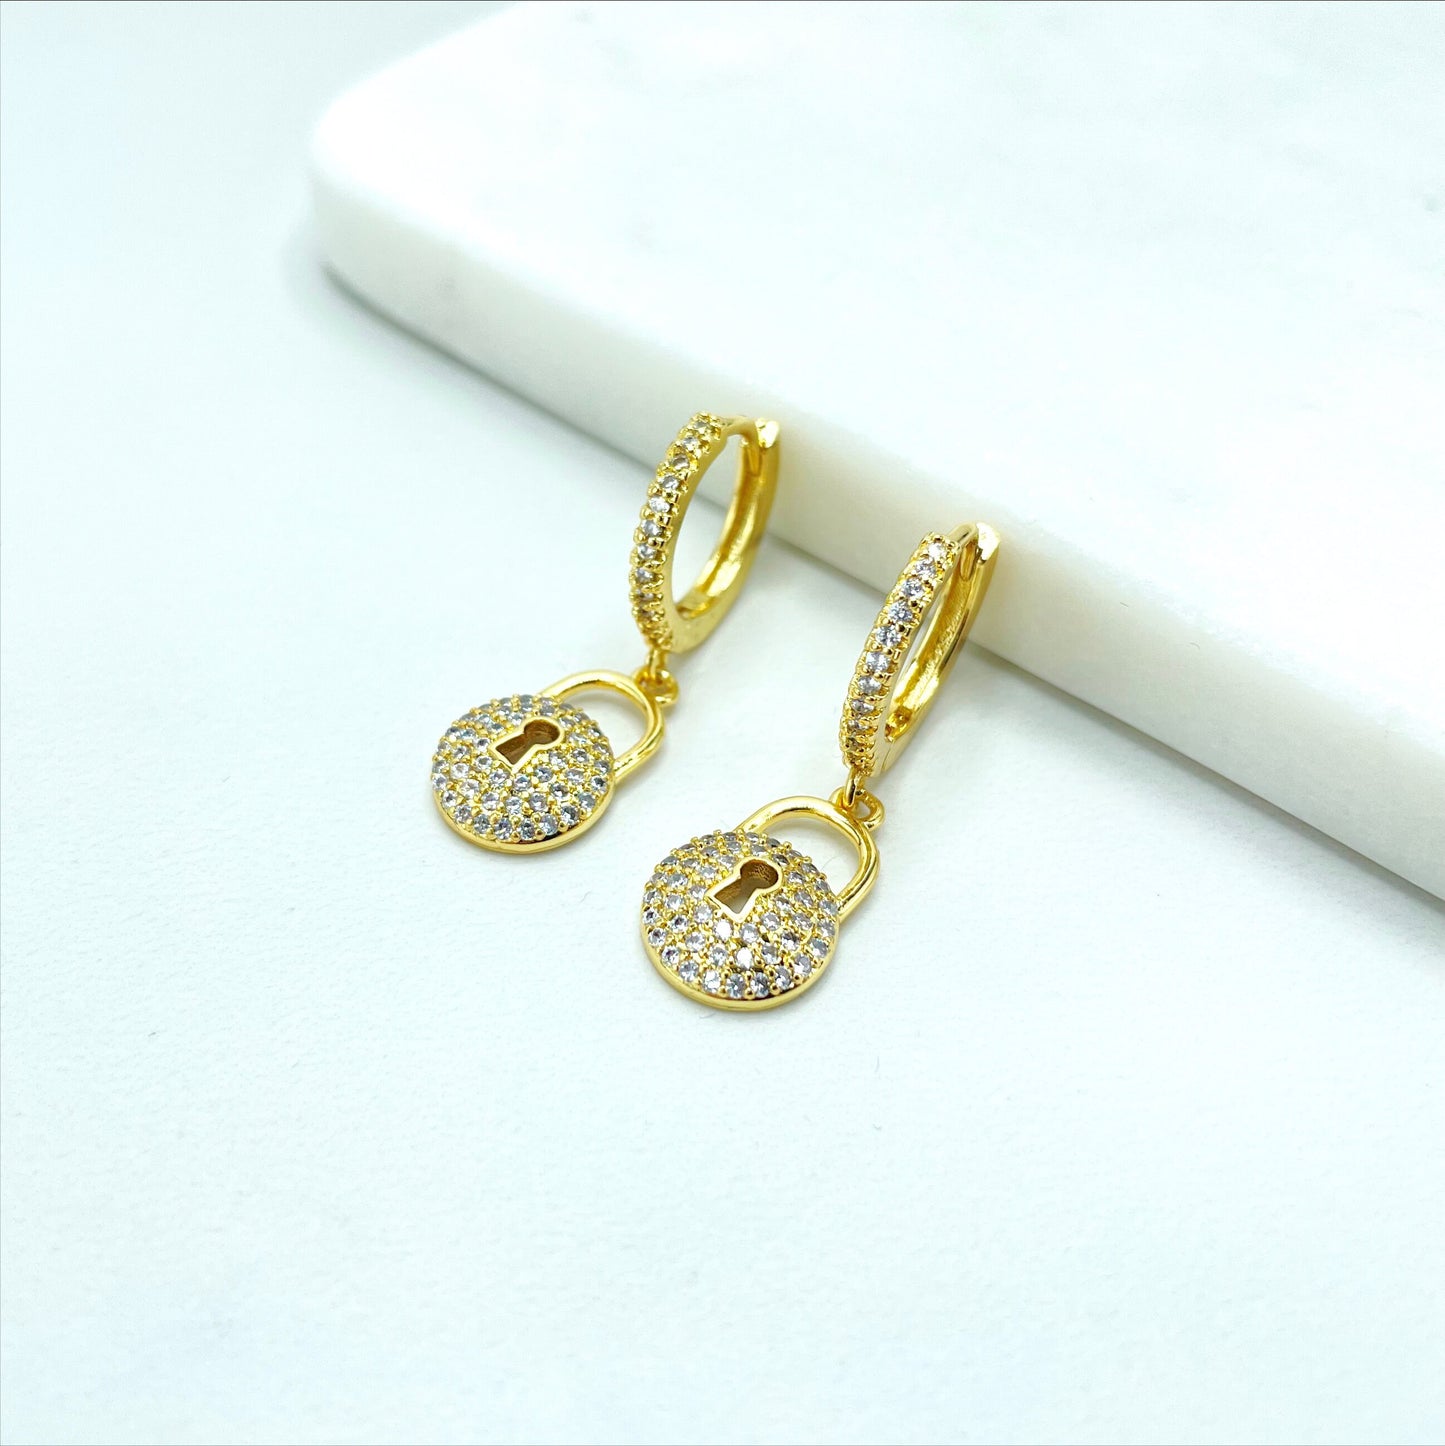 18k Gold Filled 15mm Huggie Earrings with Micro Cubic Zirconia Circle Lock Shape Charm, Dangle Earrings, Wholesale Jewelry Making Supplies